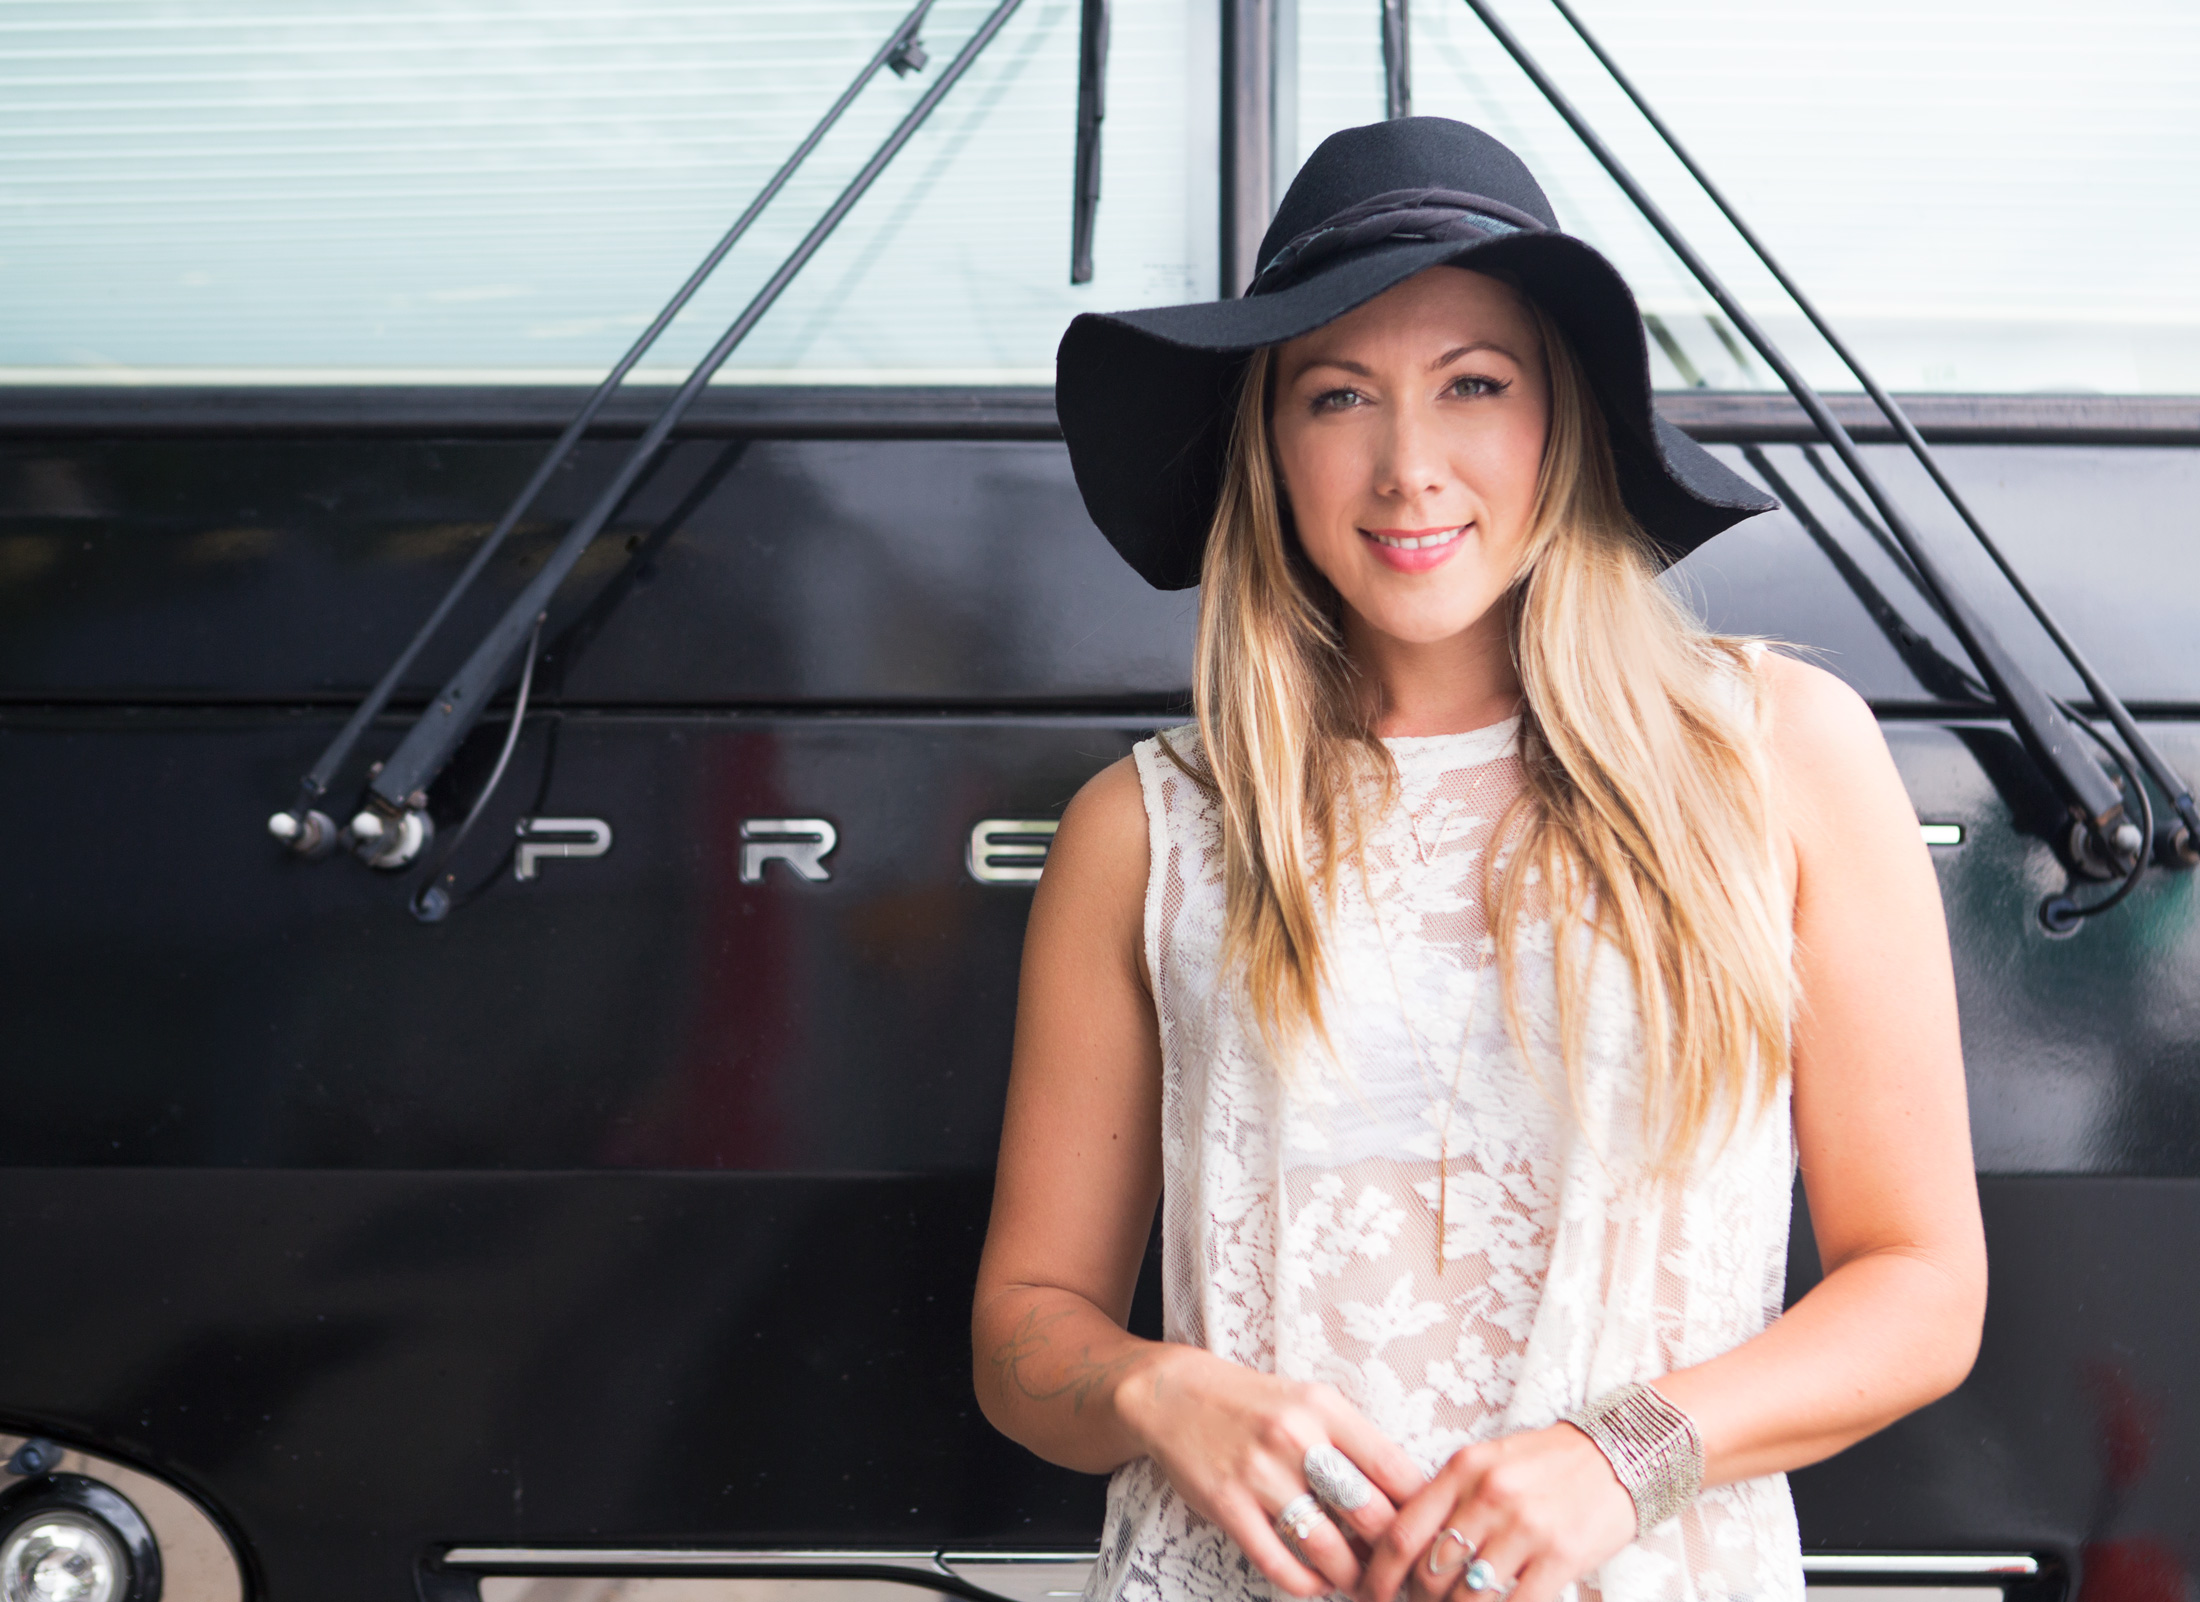 Colbie Caillat photo #999693.